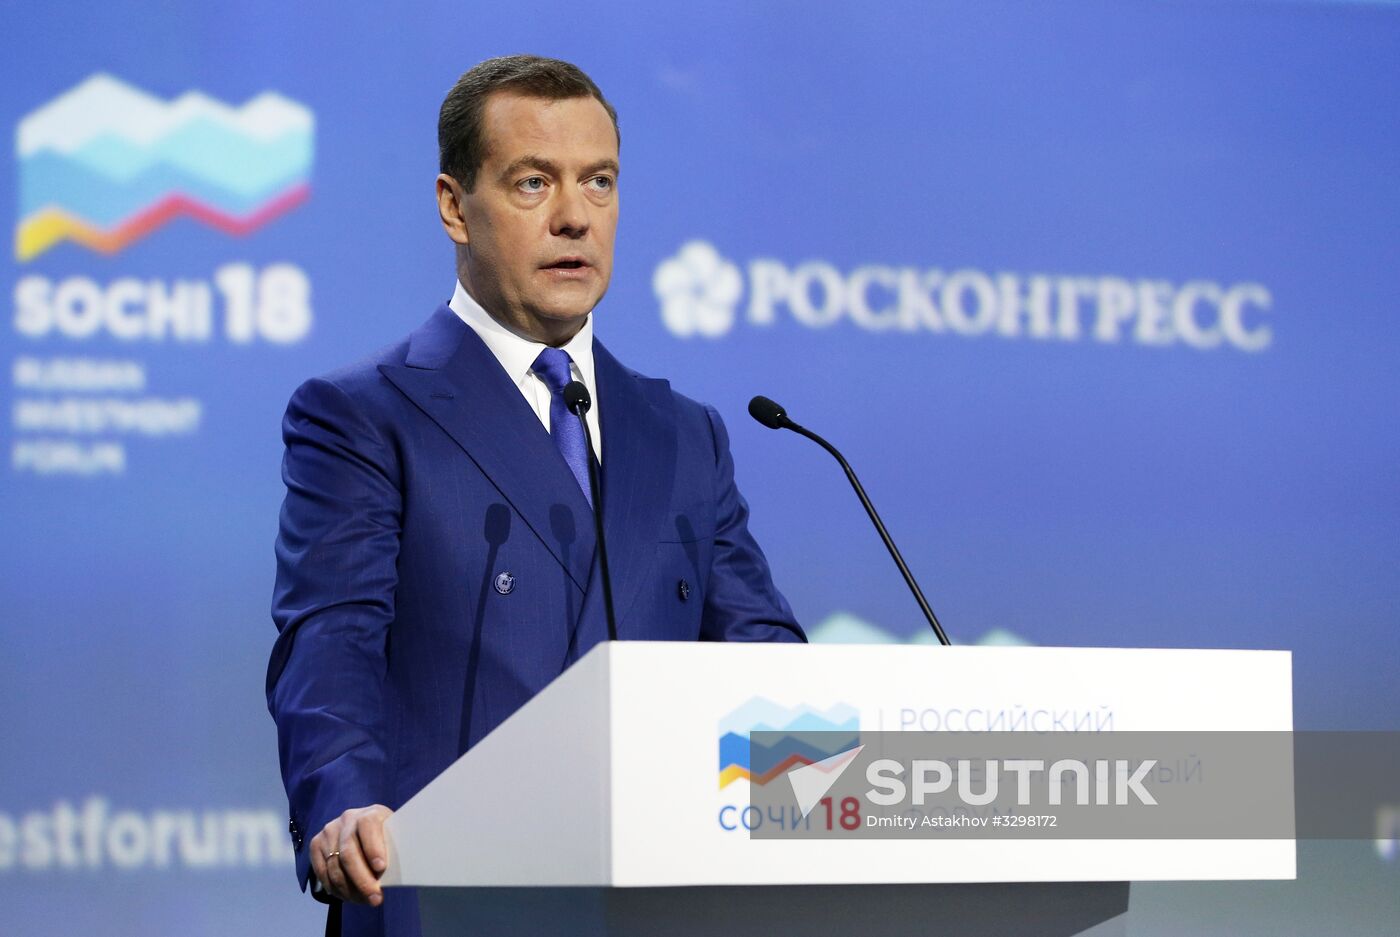 Prime Minister Medvedev attends Sochi 2018 Russian Investment Forum